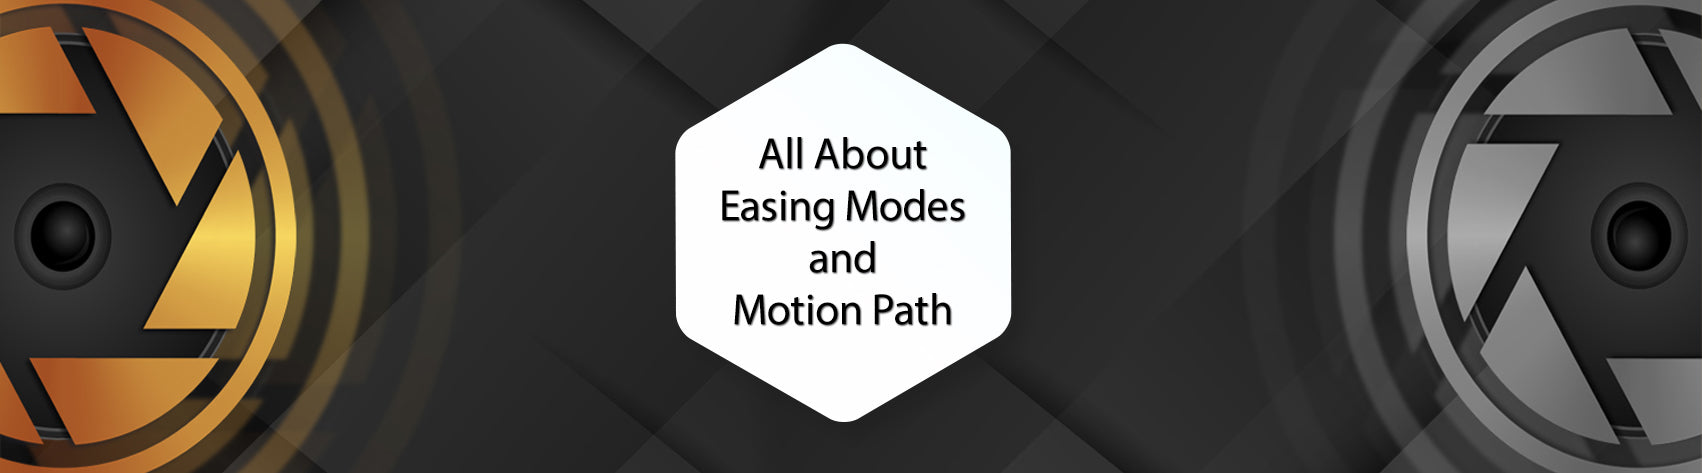 All About Easing Modes and Motion Path